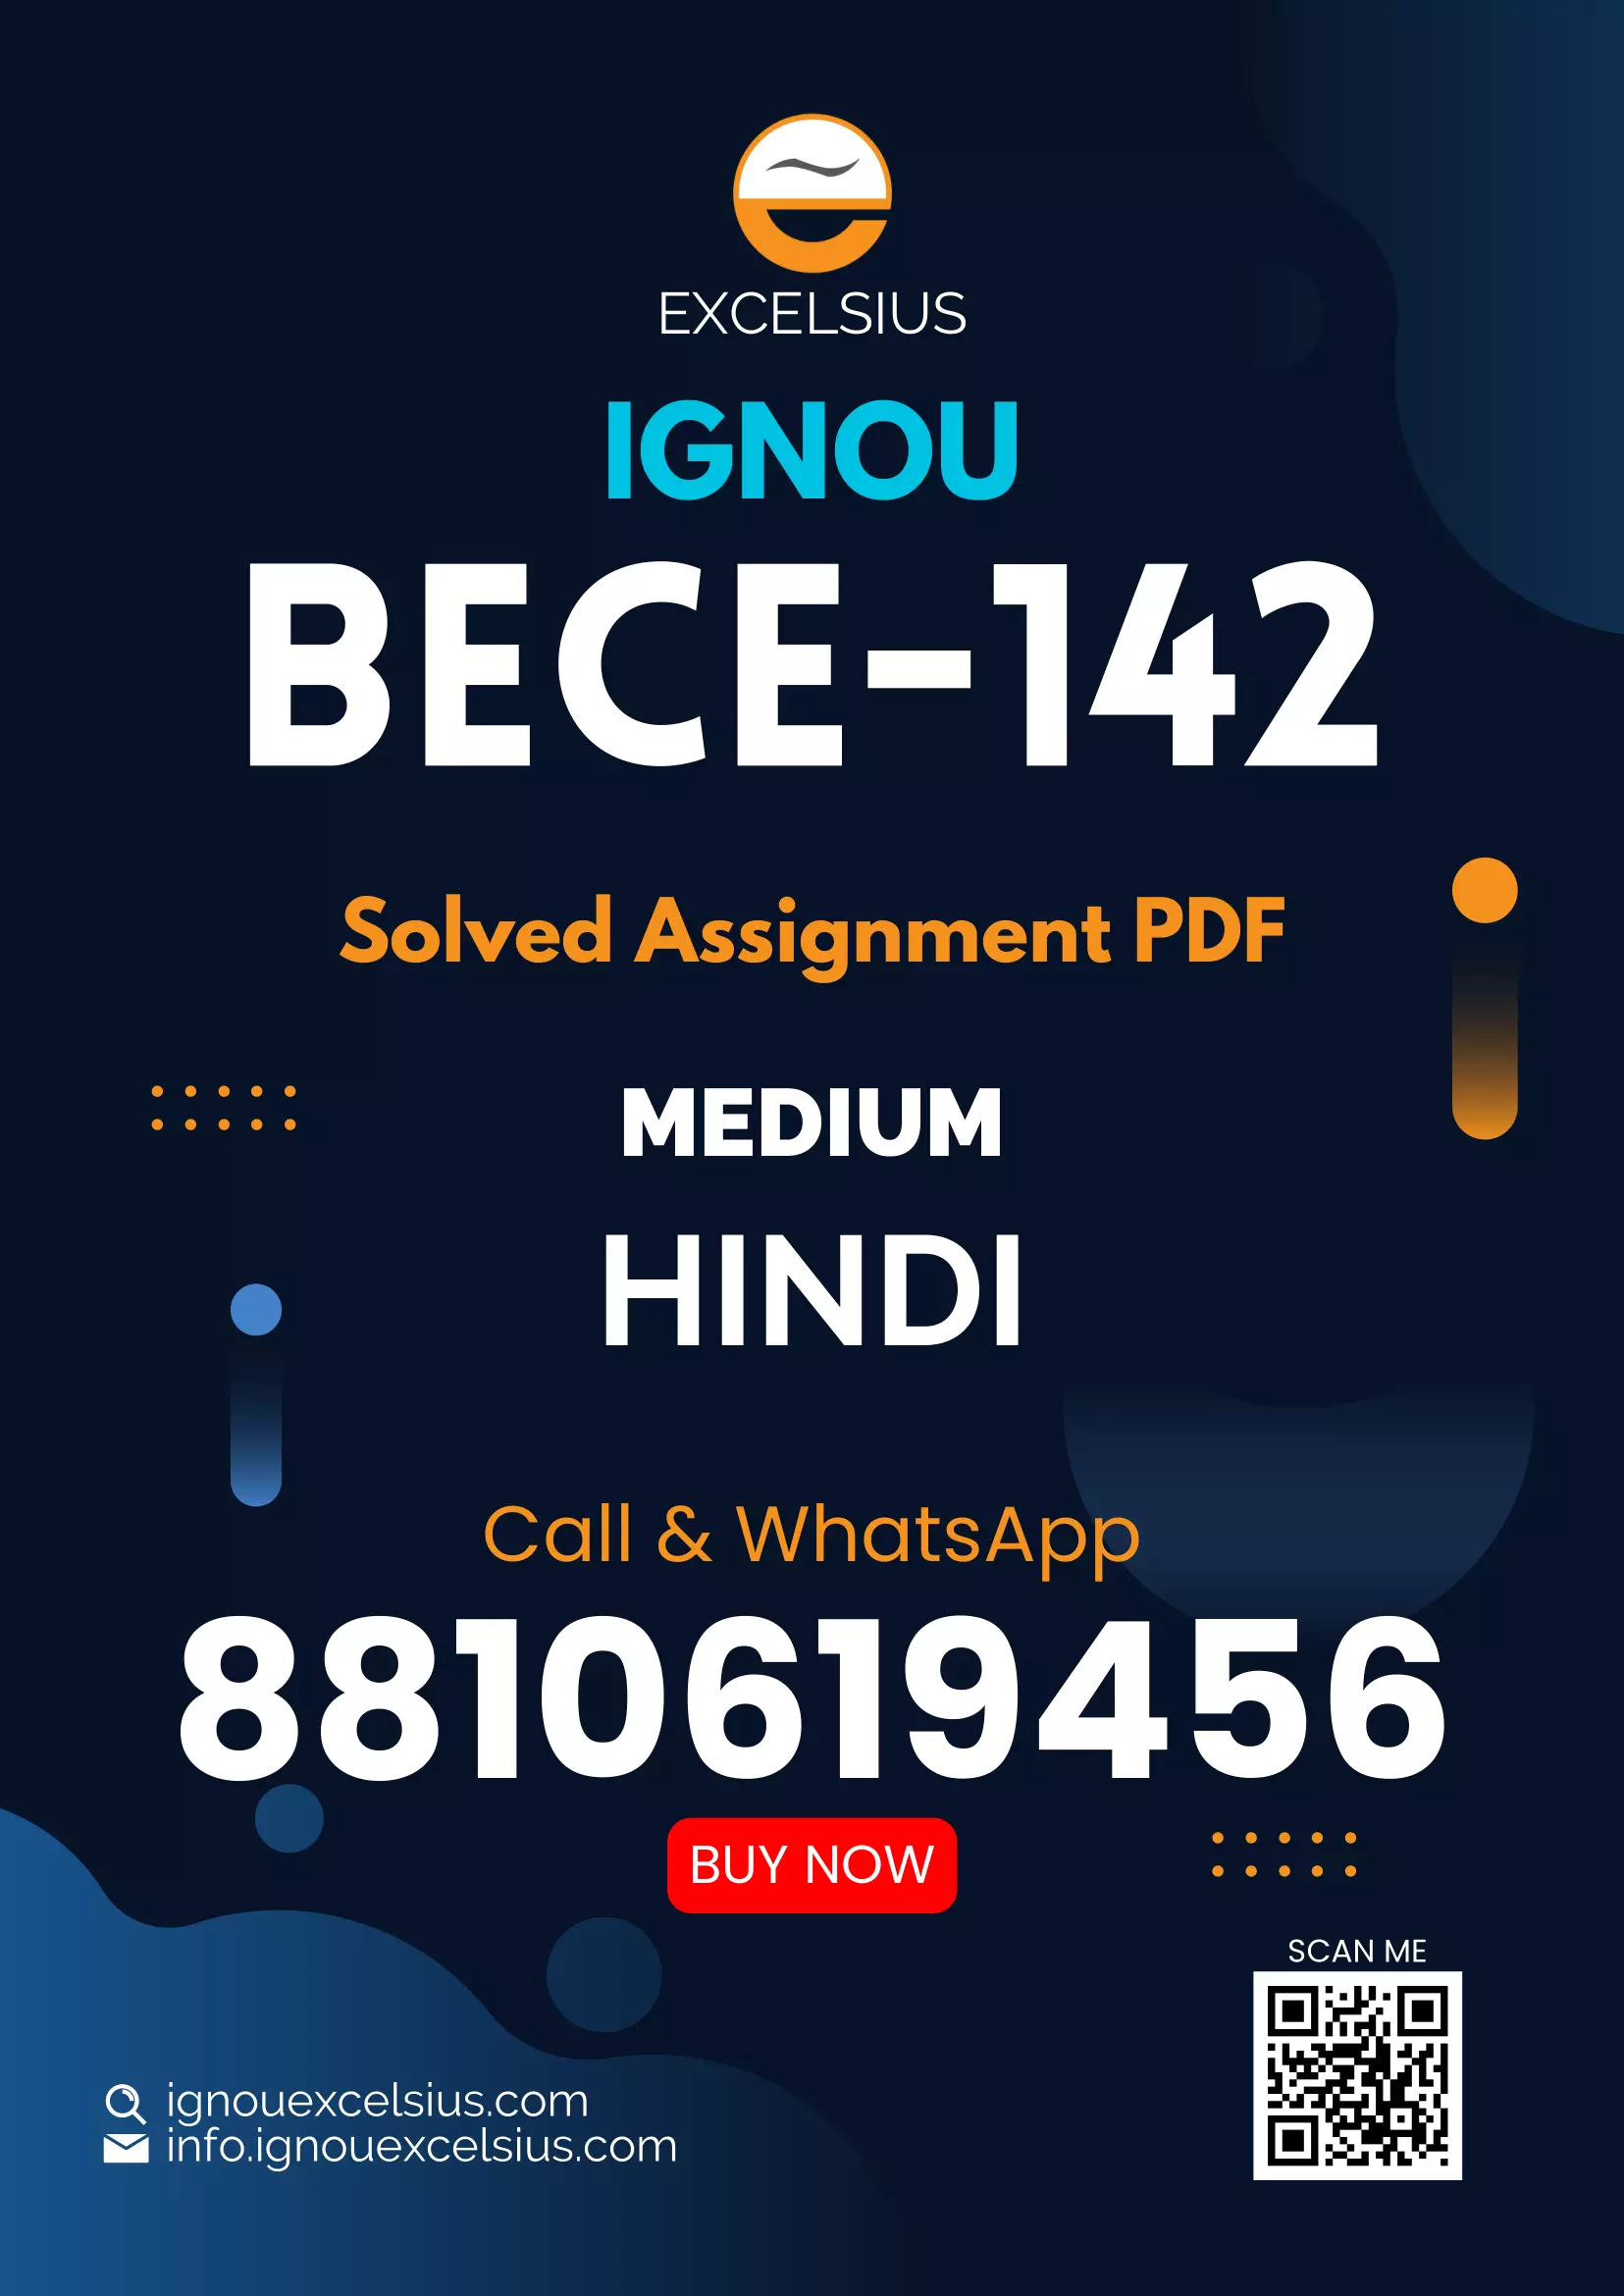 IGNOU BECE-142 - Applied Econometrics Latest Solved Assignment-July 2022 – January 2023